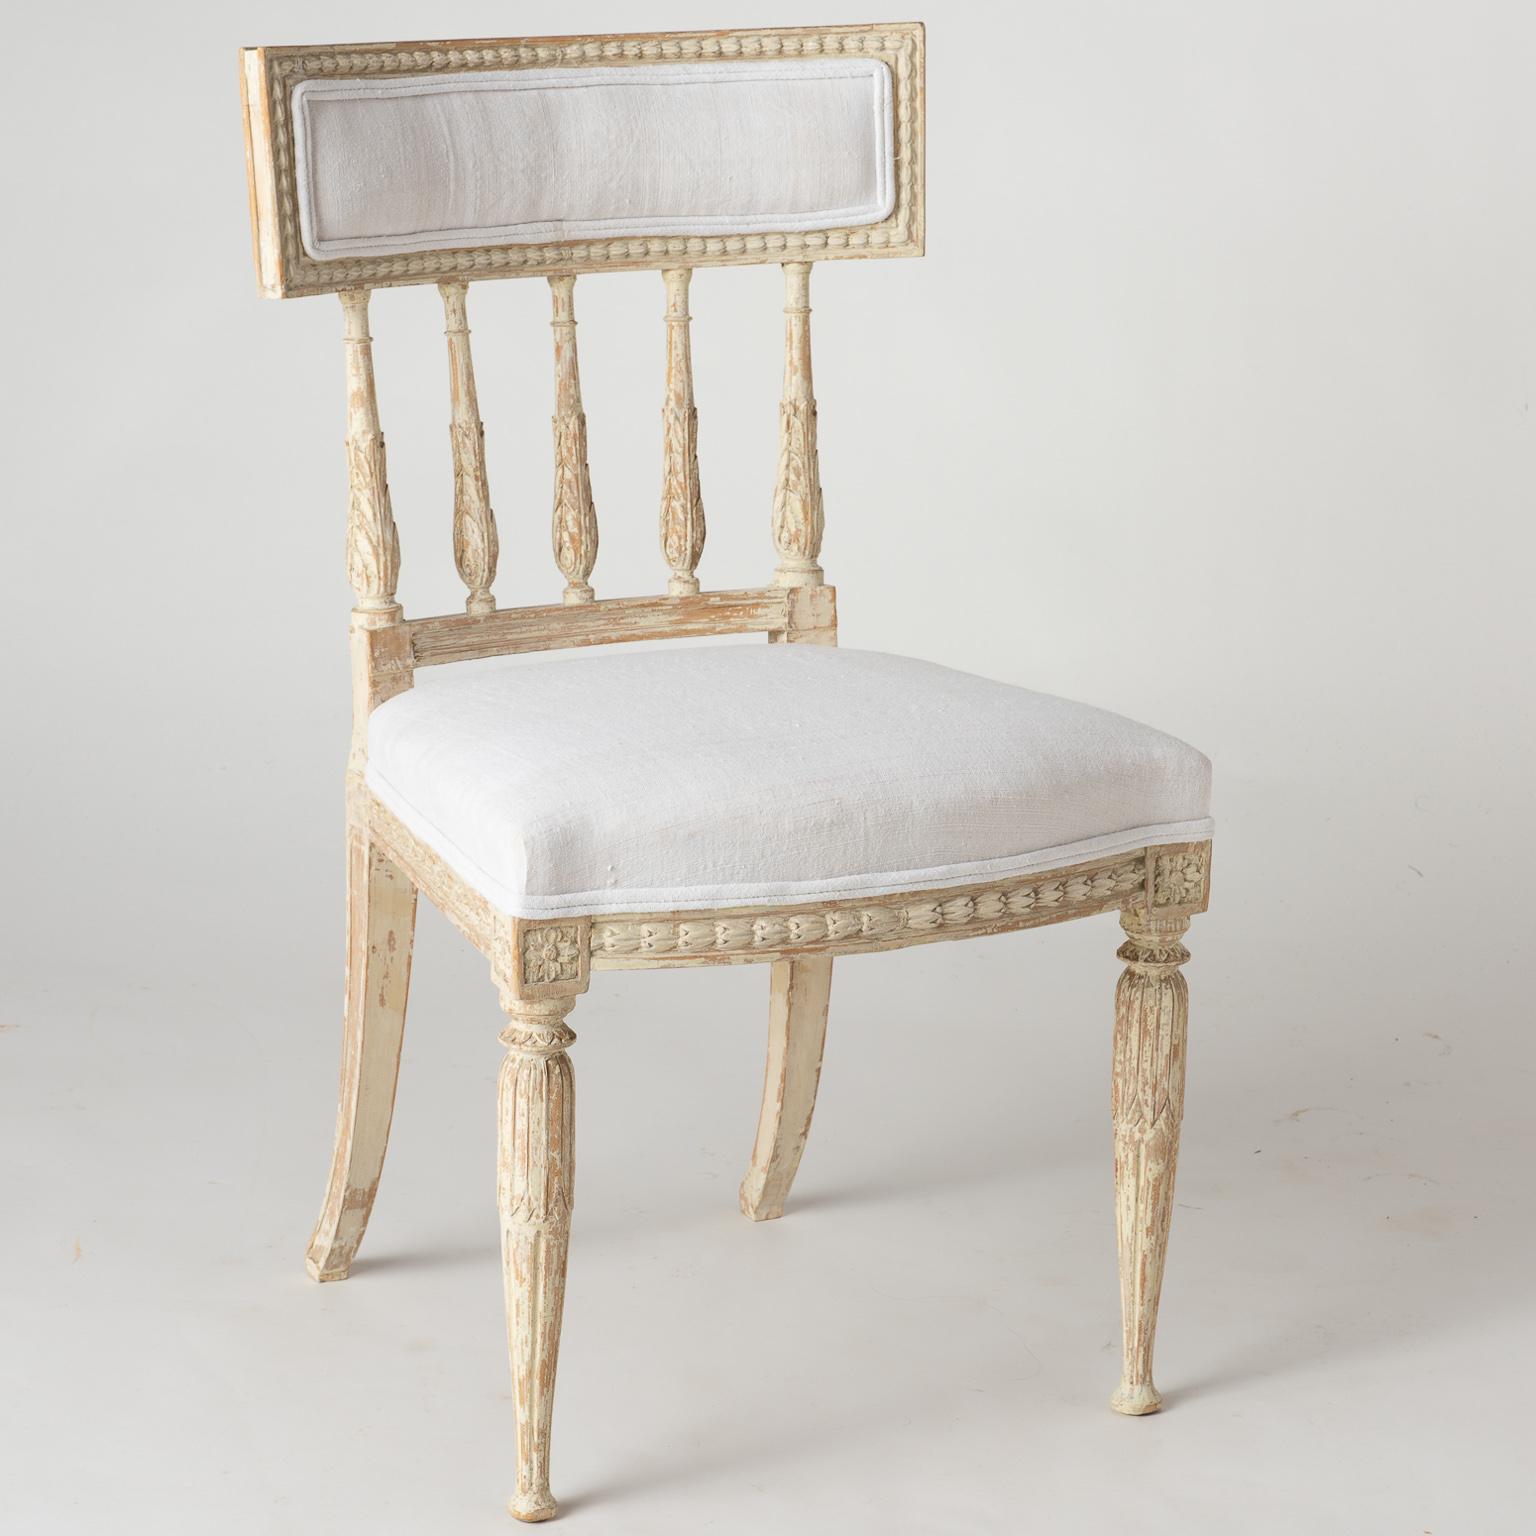 The backs on these elegant set of Gustavian Period chairs have spindles decorated with acanthus leaves, that end in a curved upholstered backrest. The acanthus motif is echoed on the legs as well. Chairs, such as these, are so comfortable that they